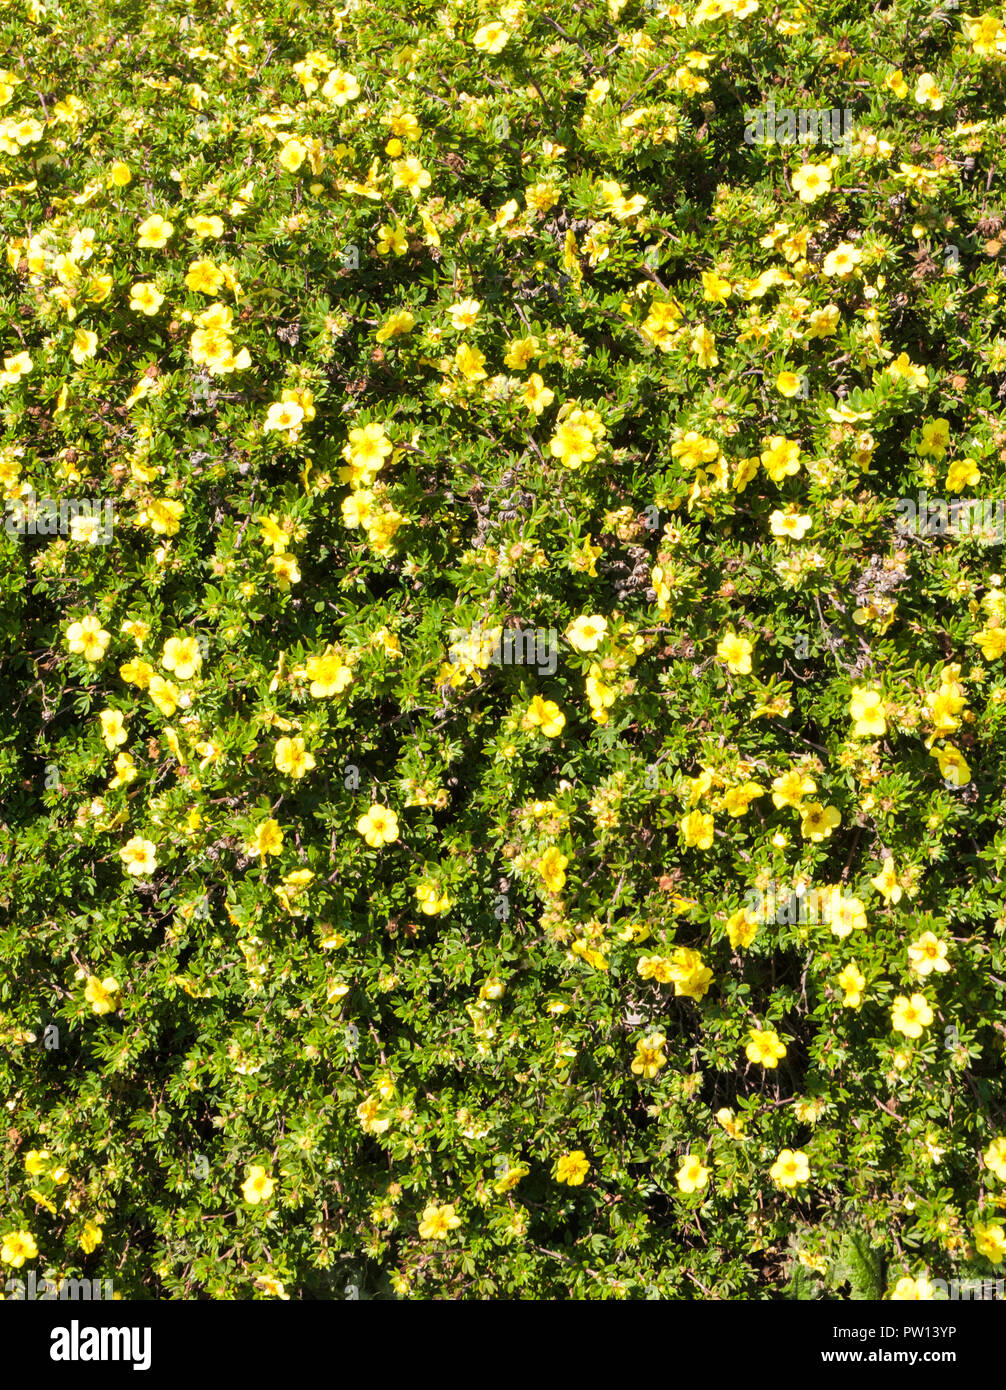 Bed of yellow Potentilla used as ground cover. Stock Photo